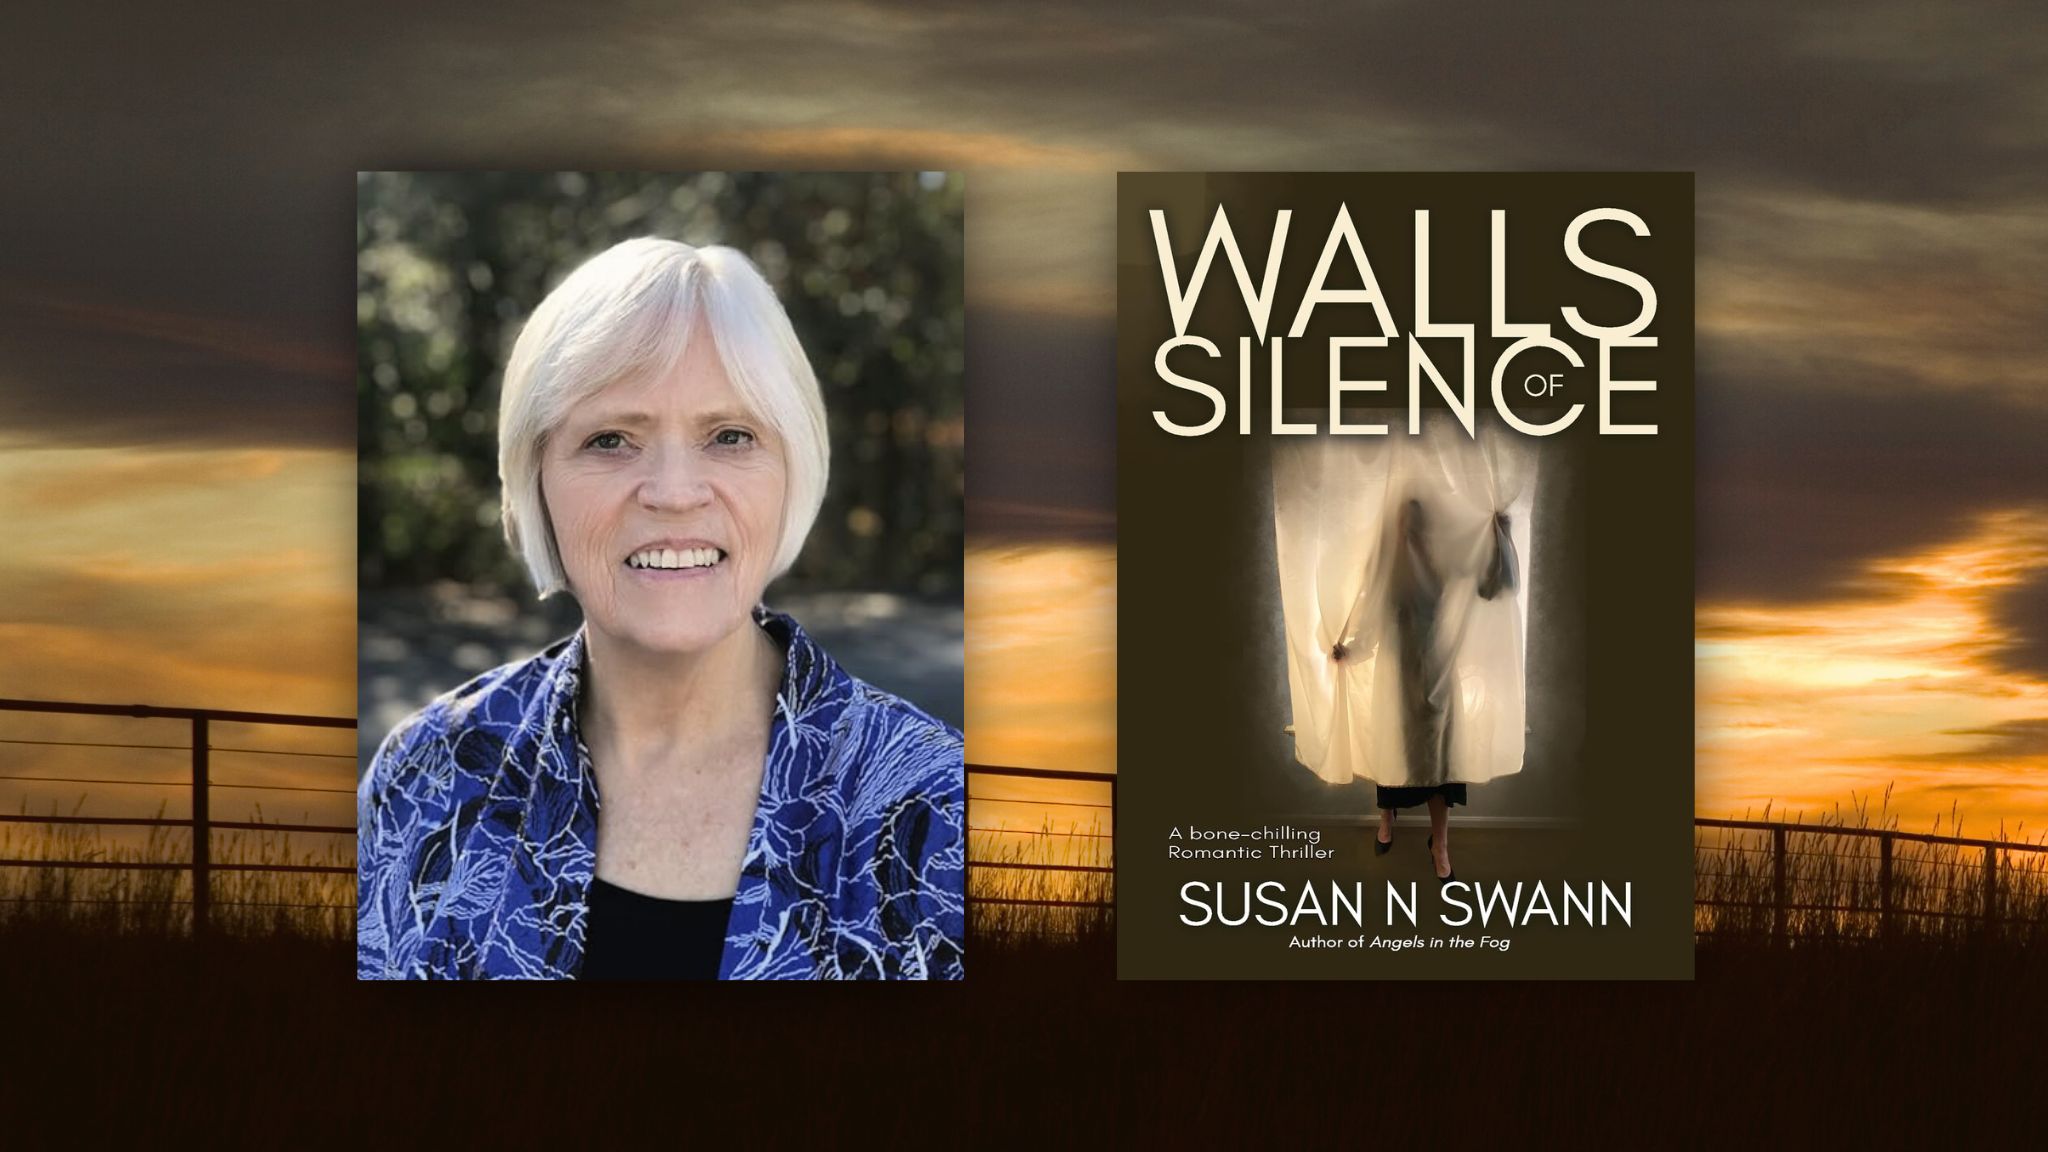 Walls of Silence by Susan Swann